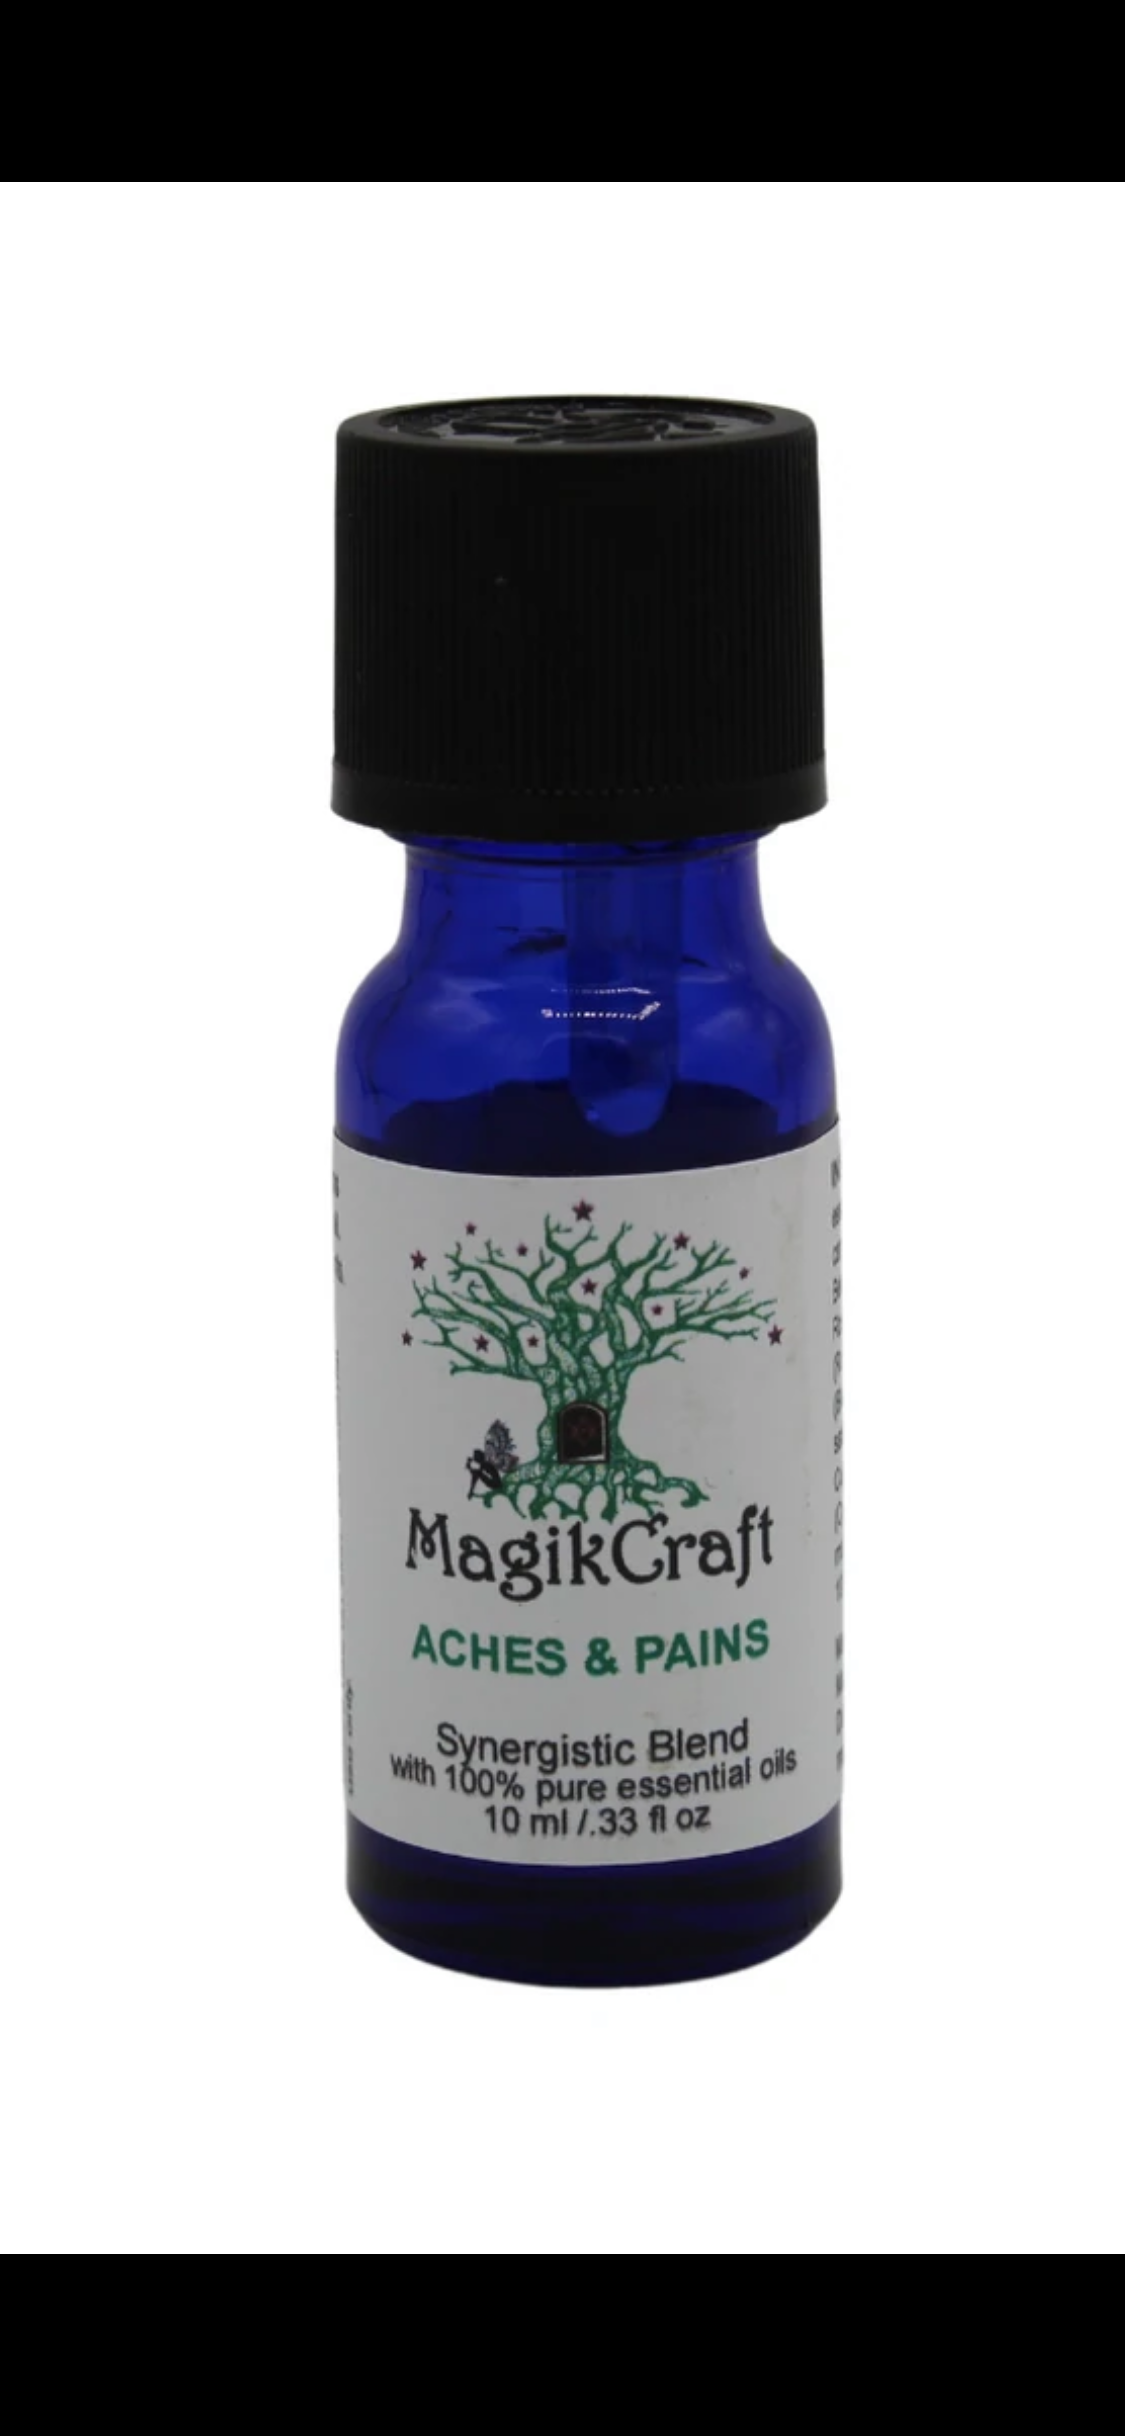 Aches and Pains Essential Oil Blend by MagikCraft